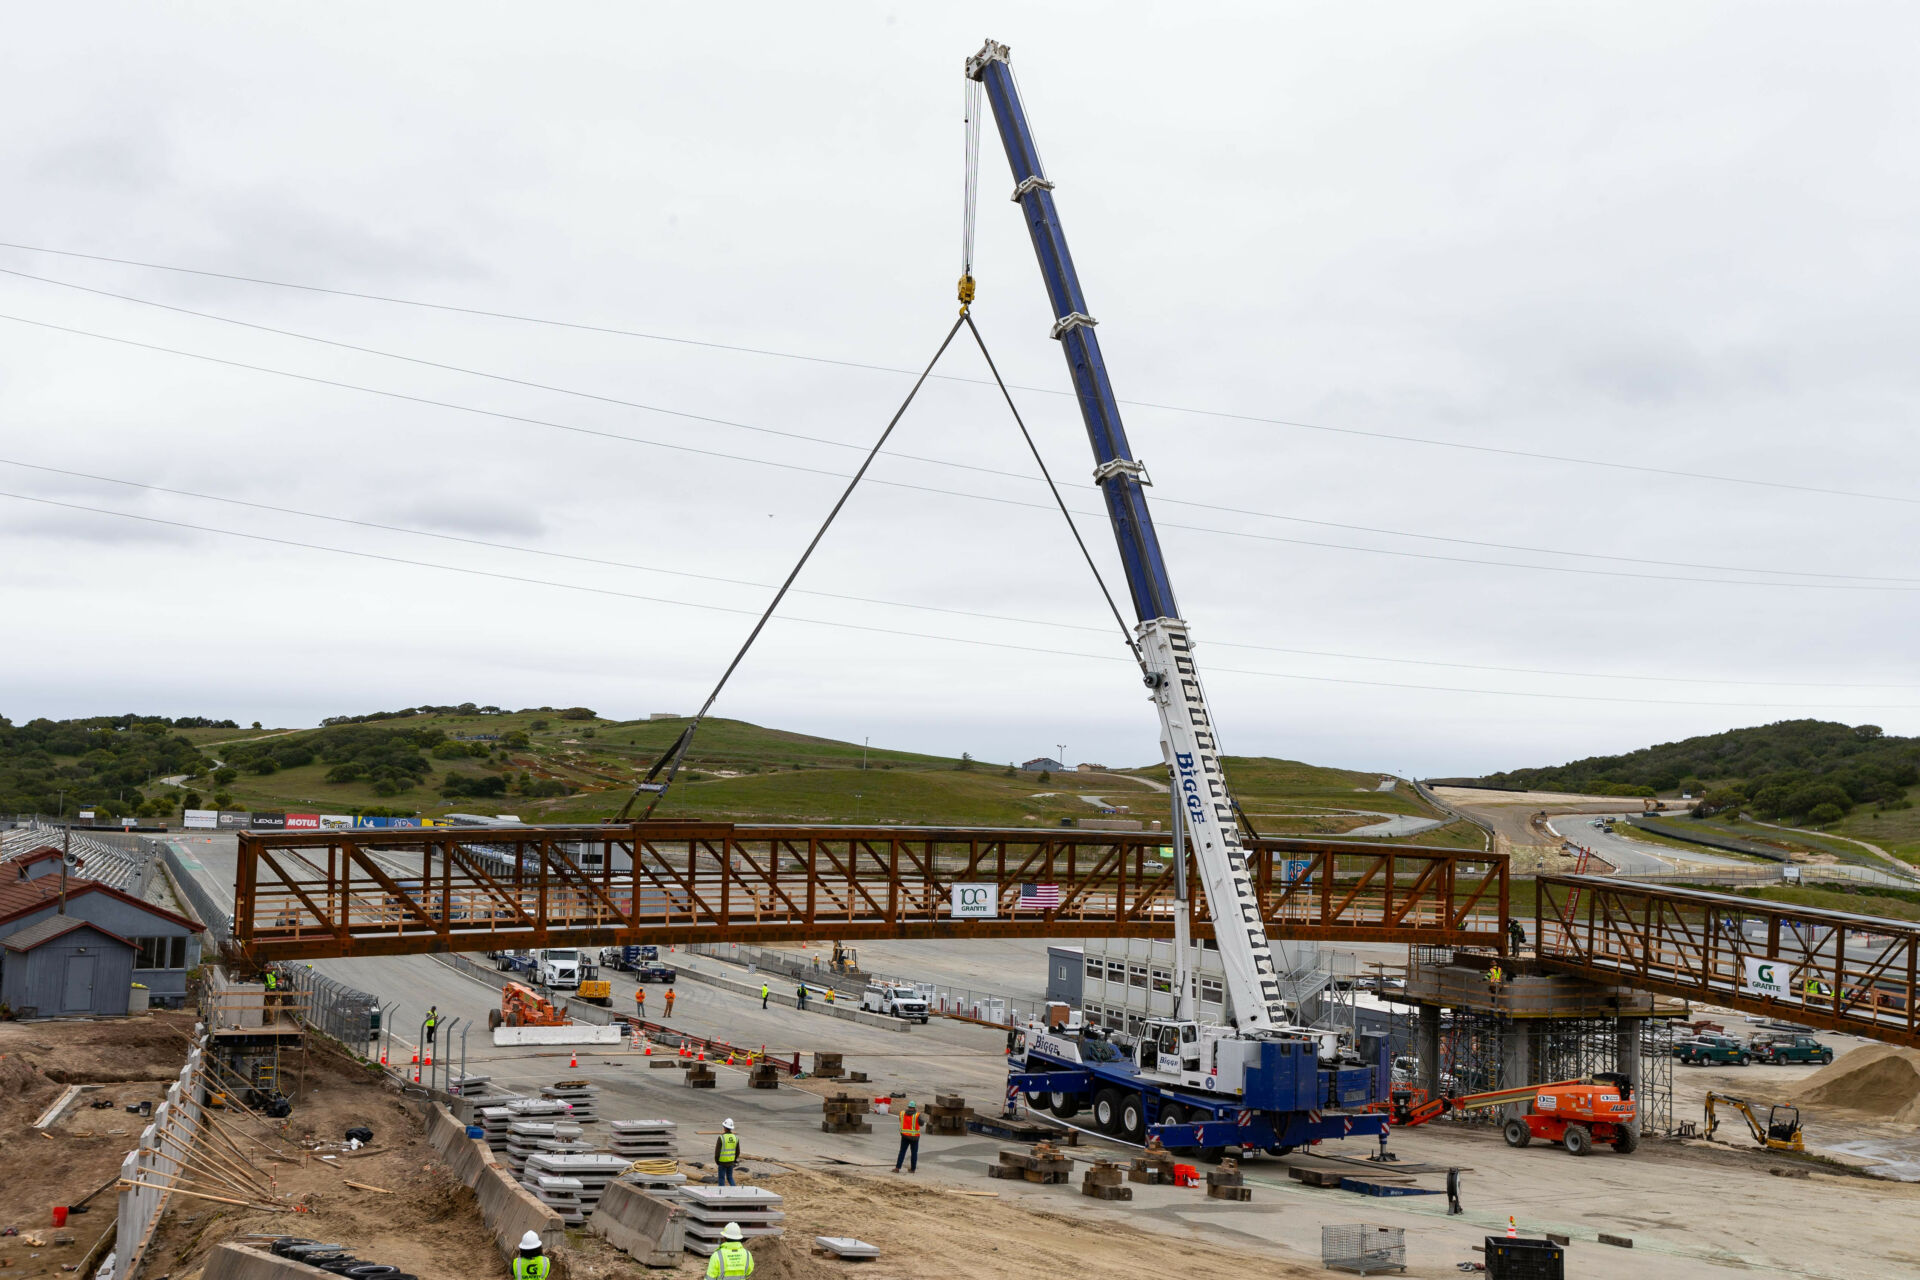 The 160-foot, 71-ton main section of the new Start/Finish bridge is lifted into place at WeatherTech Raceway Laguna Seca. Photo by TM Hill Photographer.